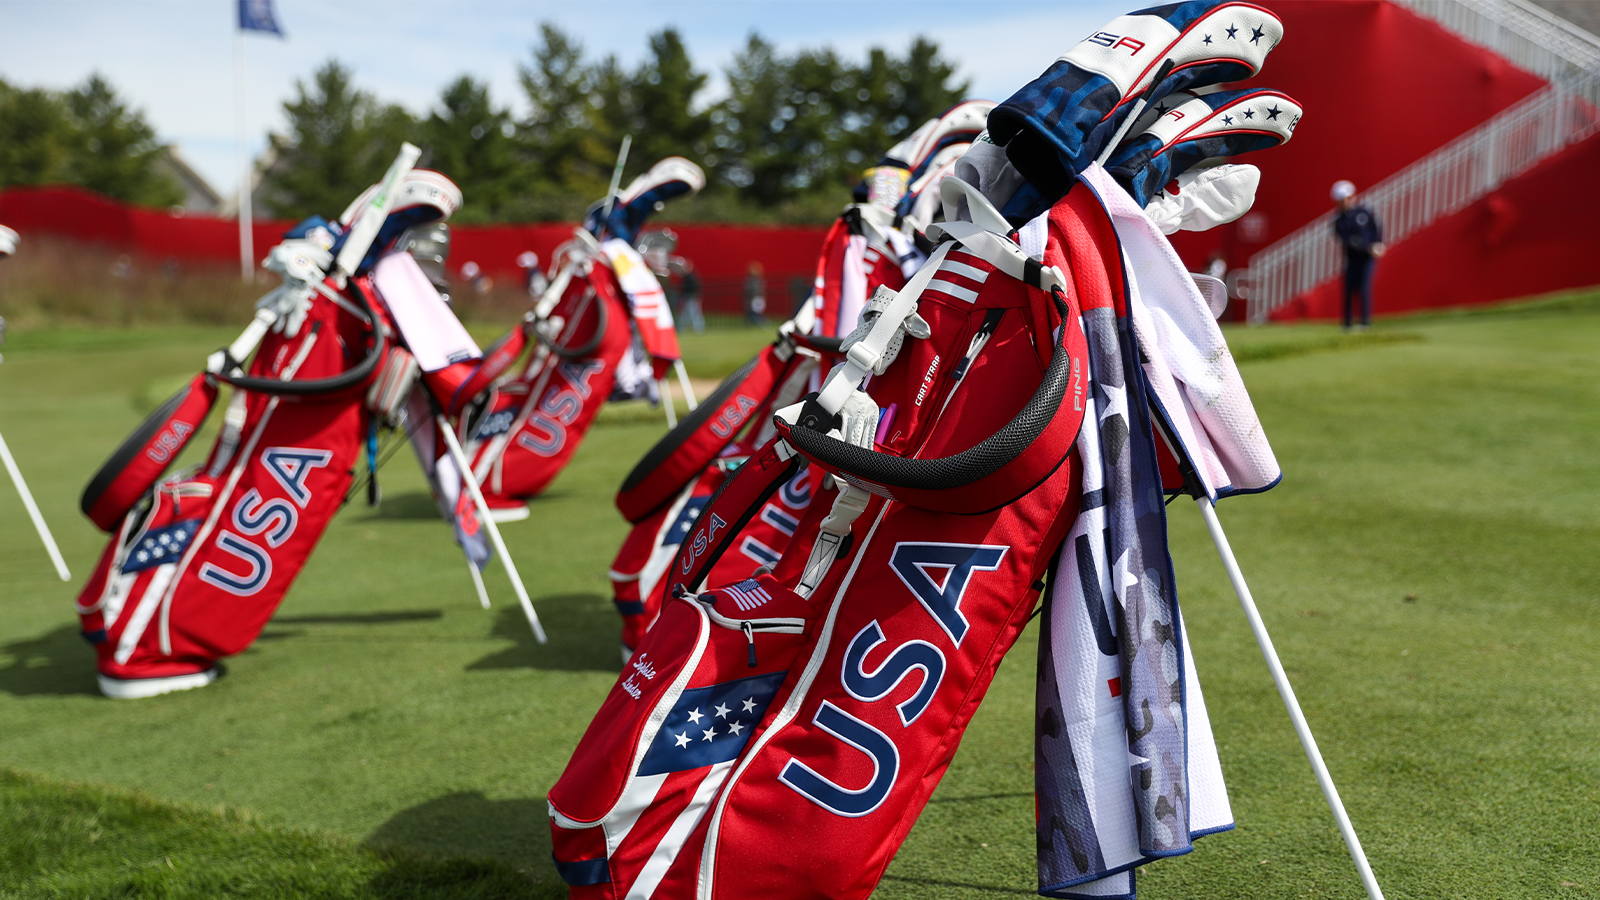 The United States Junior Ryder Cup team golf bags during the Junior Ryder Cup Exhibition Match for the 2020 Ryder Cup at Whistling Straits on September 22, 2021 in Kohler, WI. (Photo by Maddie Meyer/PGA of America)